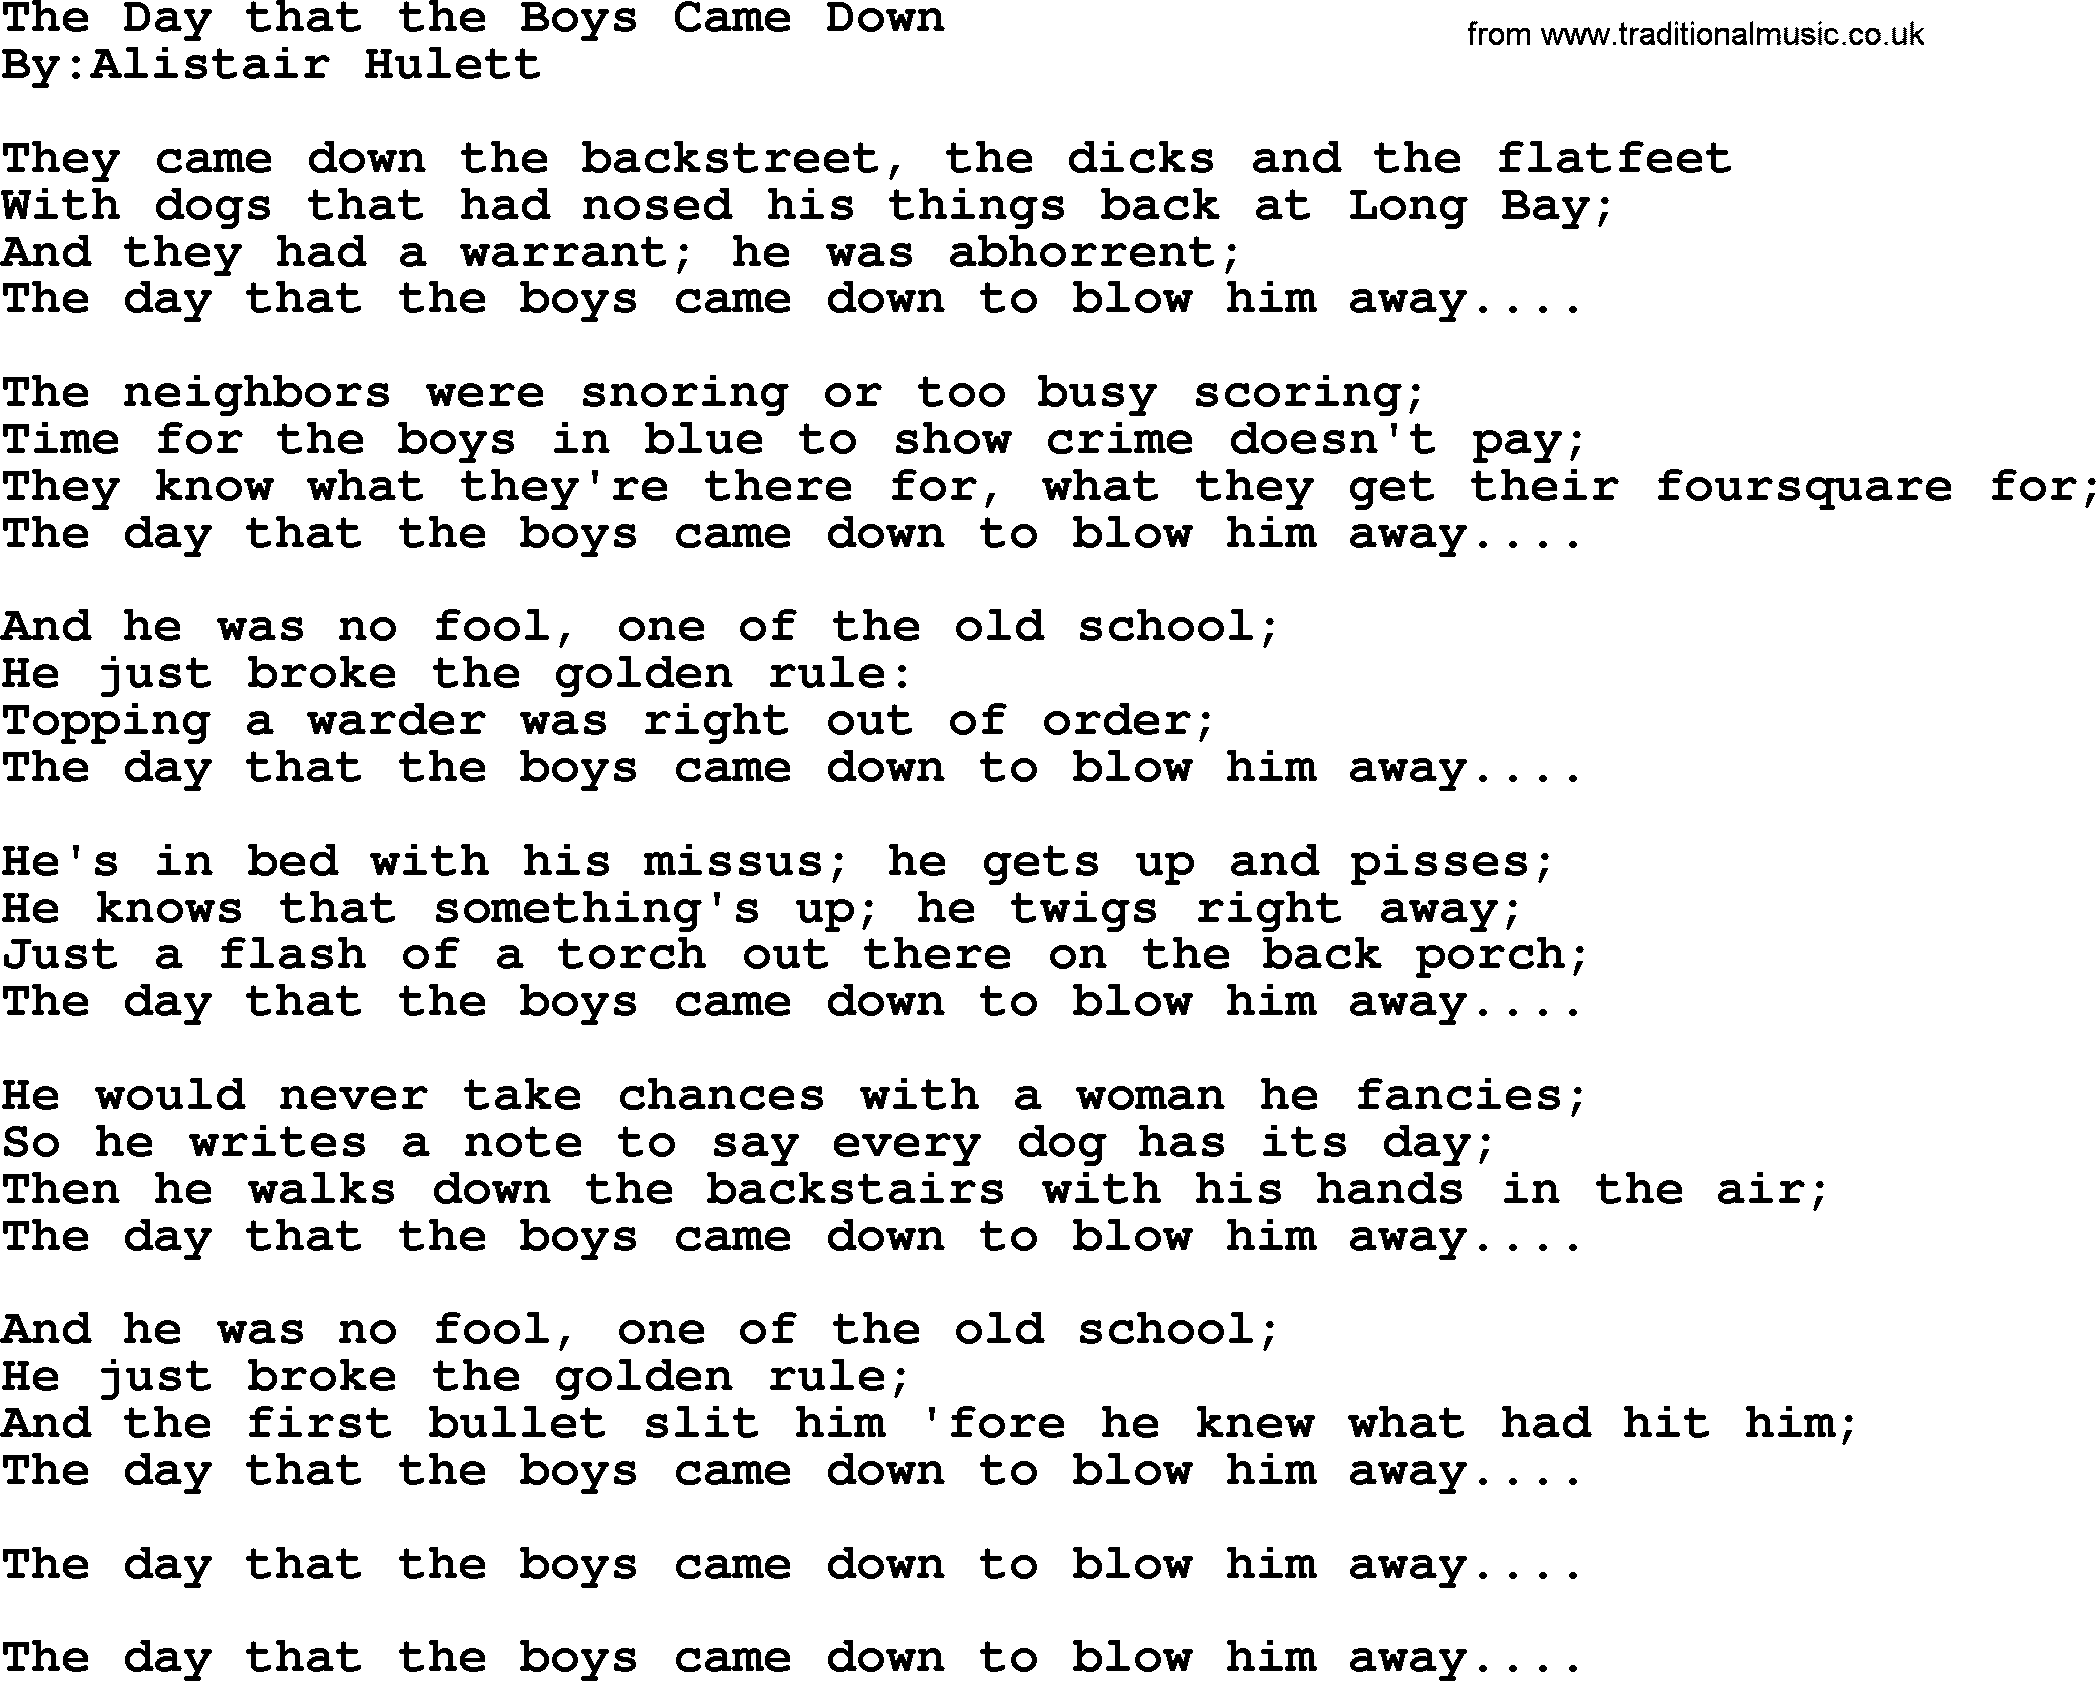 Political, Solidarity, Workers or Union song: The Day That The Boys Came Down, lyrics